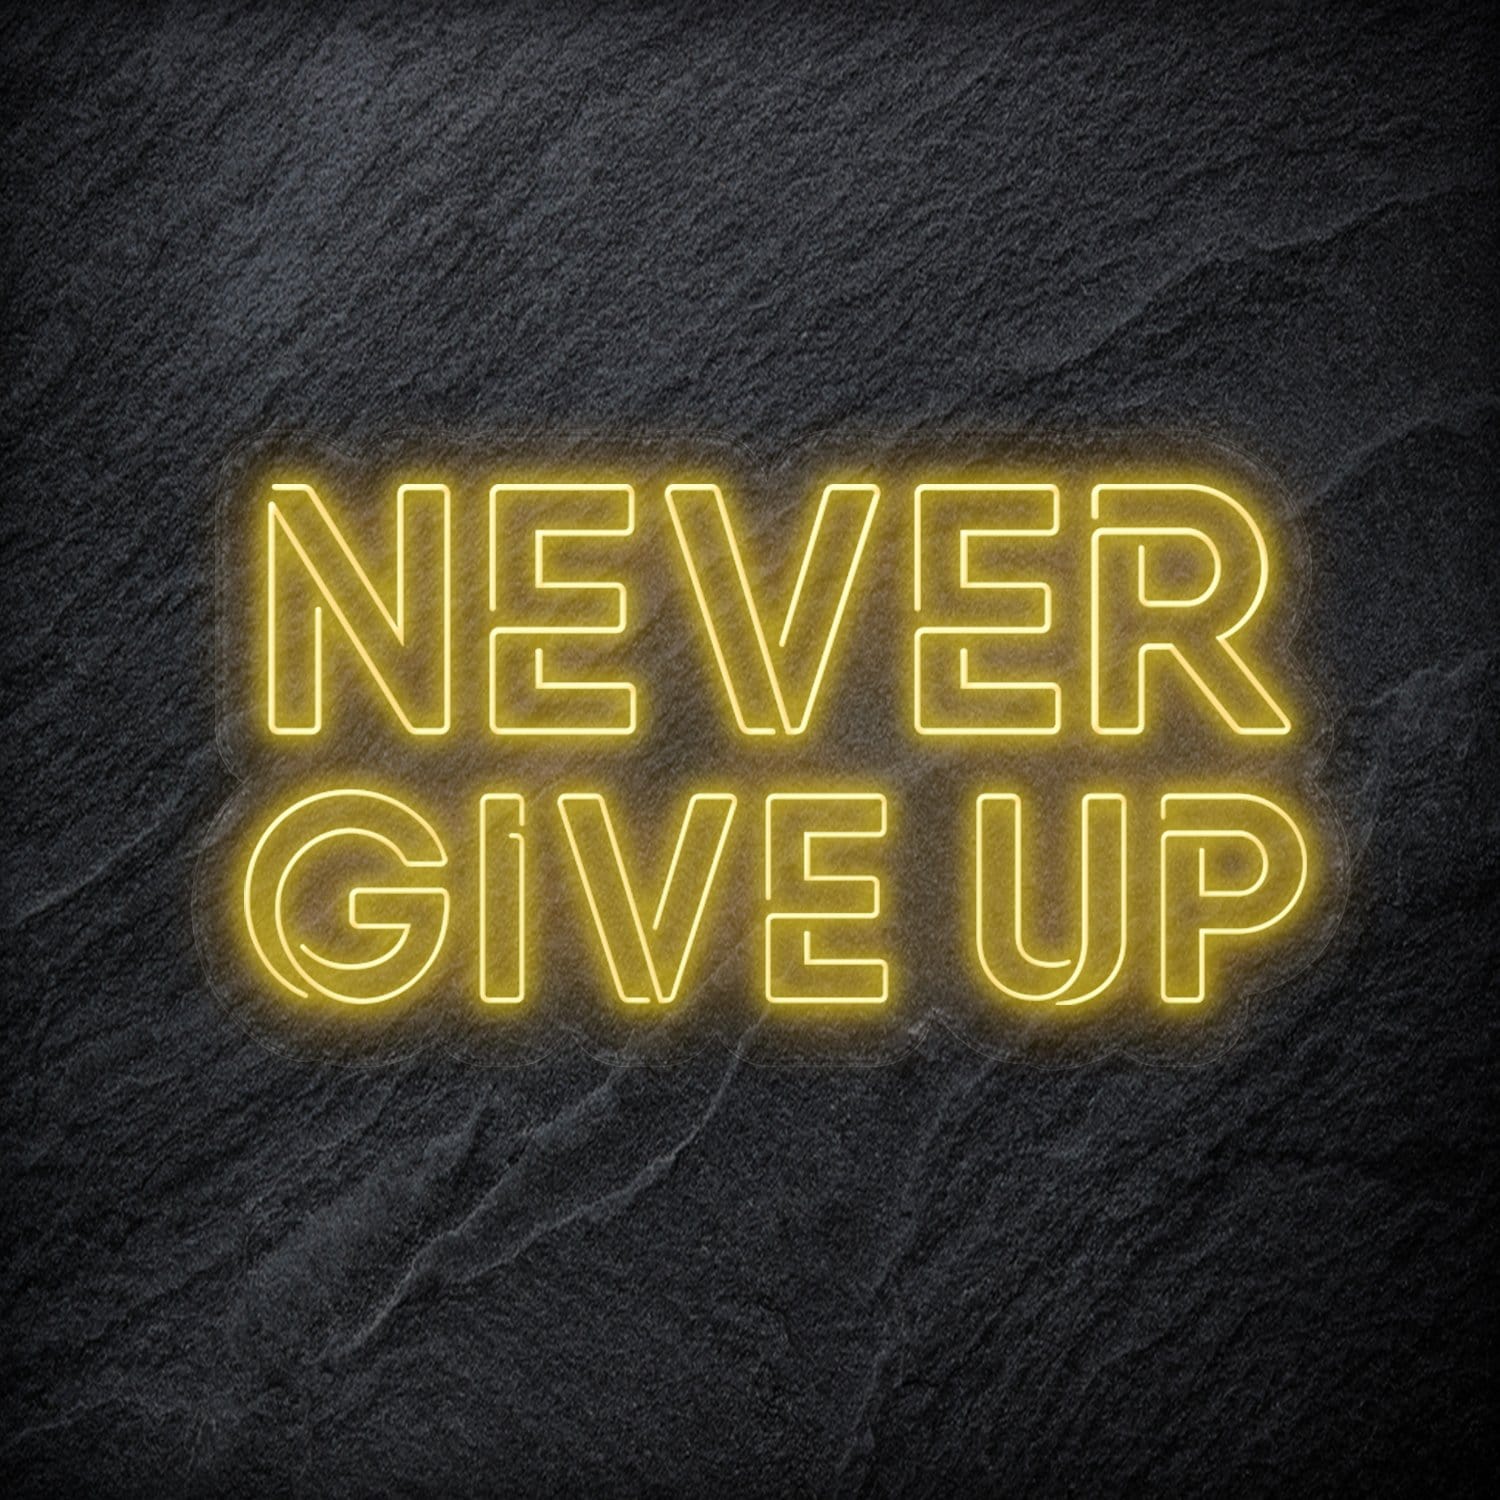 "Never Give Up" LED Neon Schriftzug Sign - NEONEVERGLOW